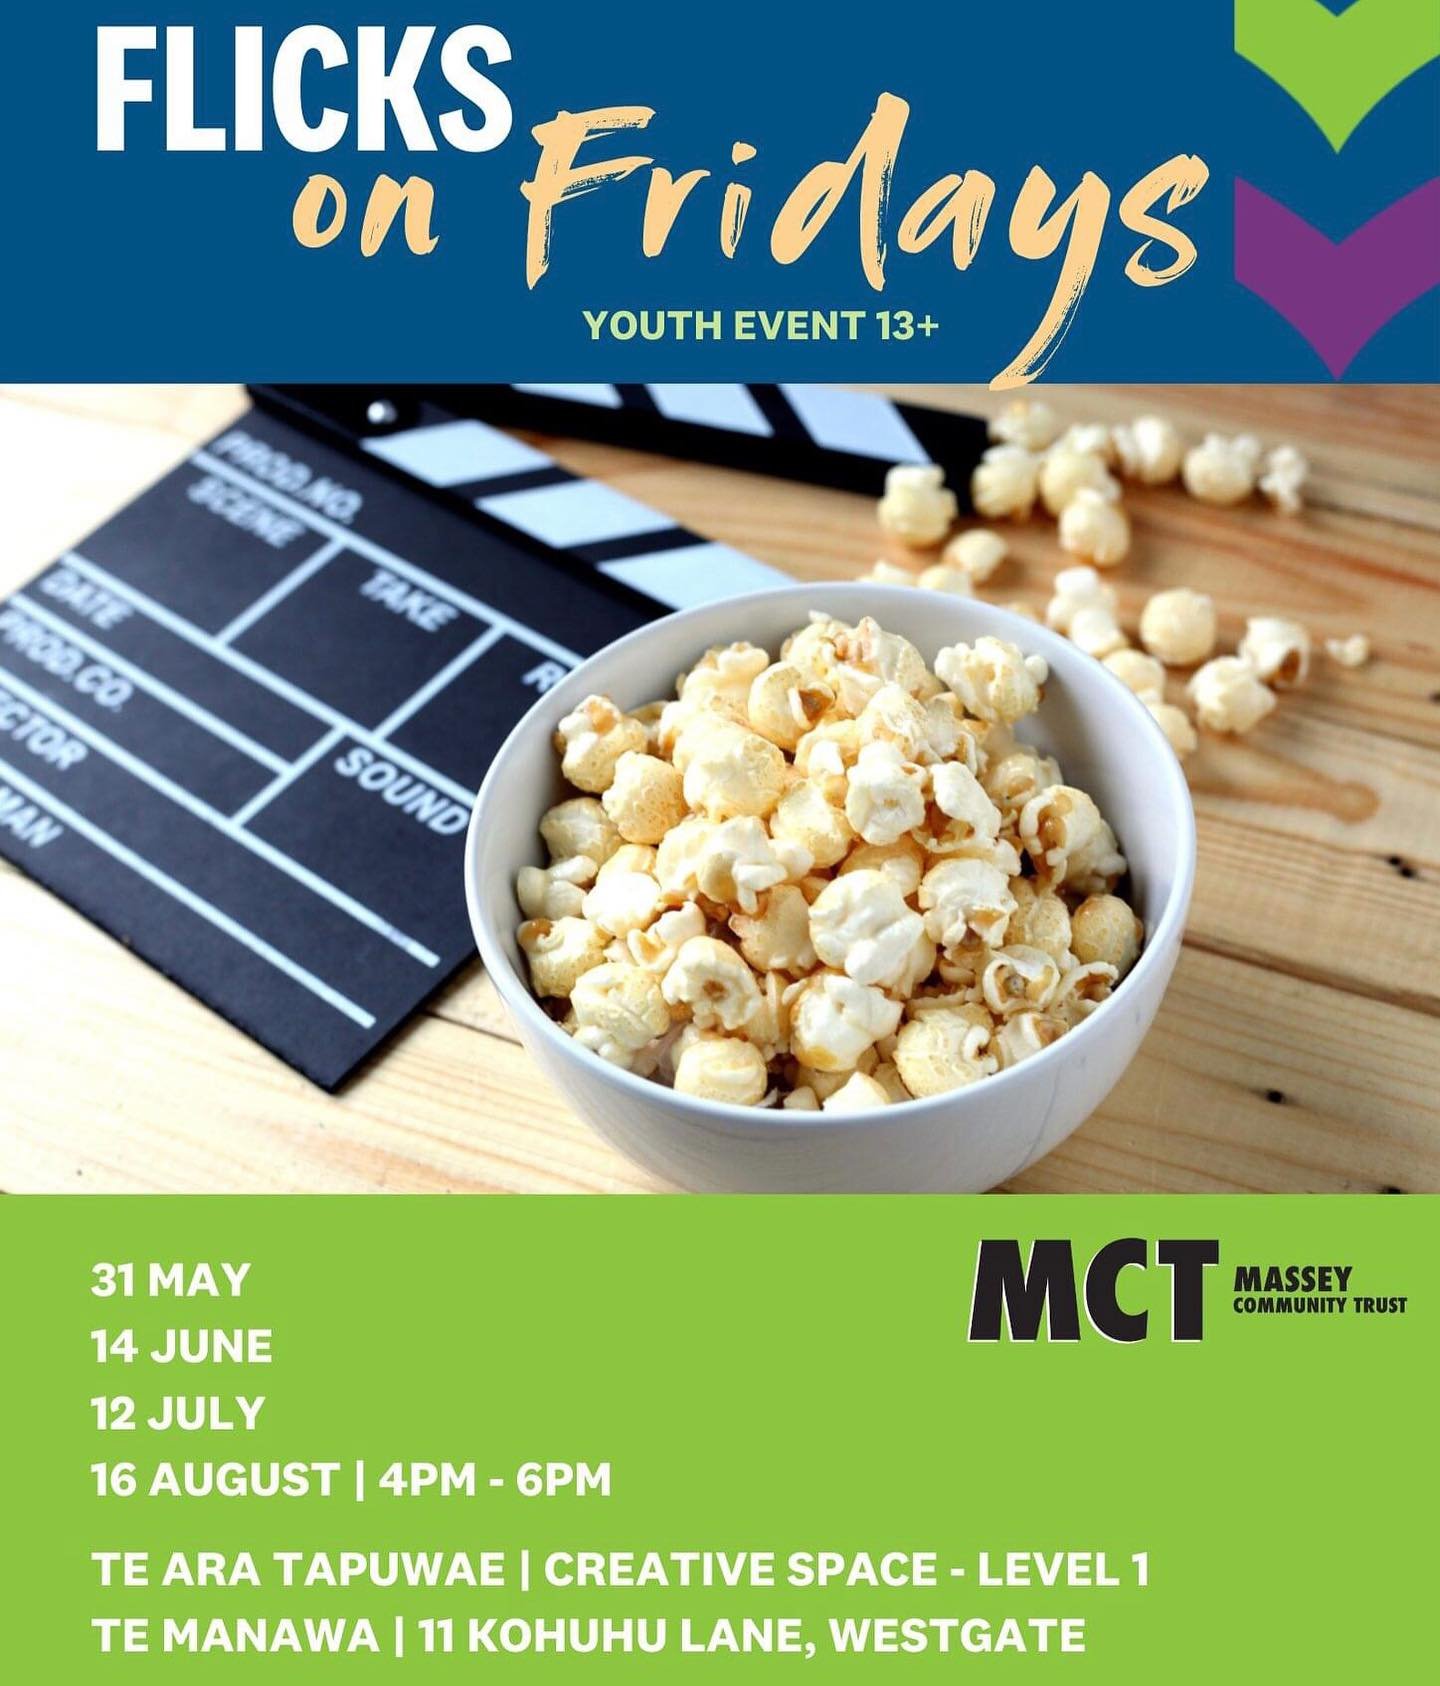 We are excited to announce that we will be running some Movie Nights with the awesome team at @te.manawa.auckland over the next few months!! 🙌

If you are a young person and looking for something fun to do before heading into the weekend, then come 